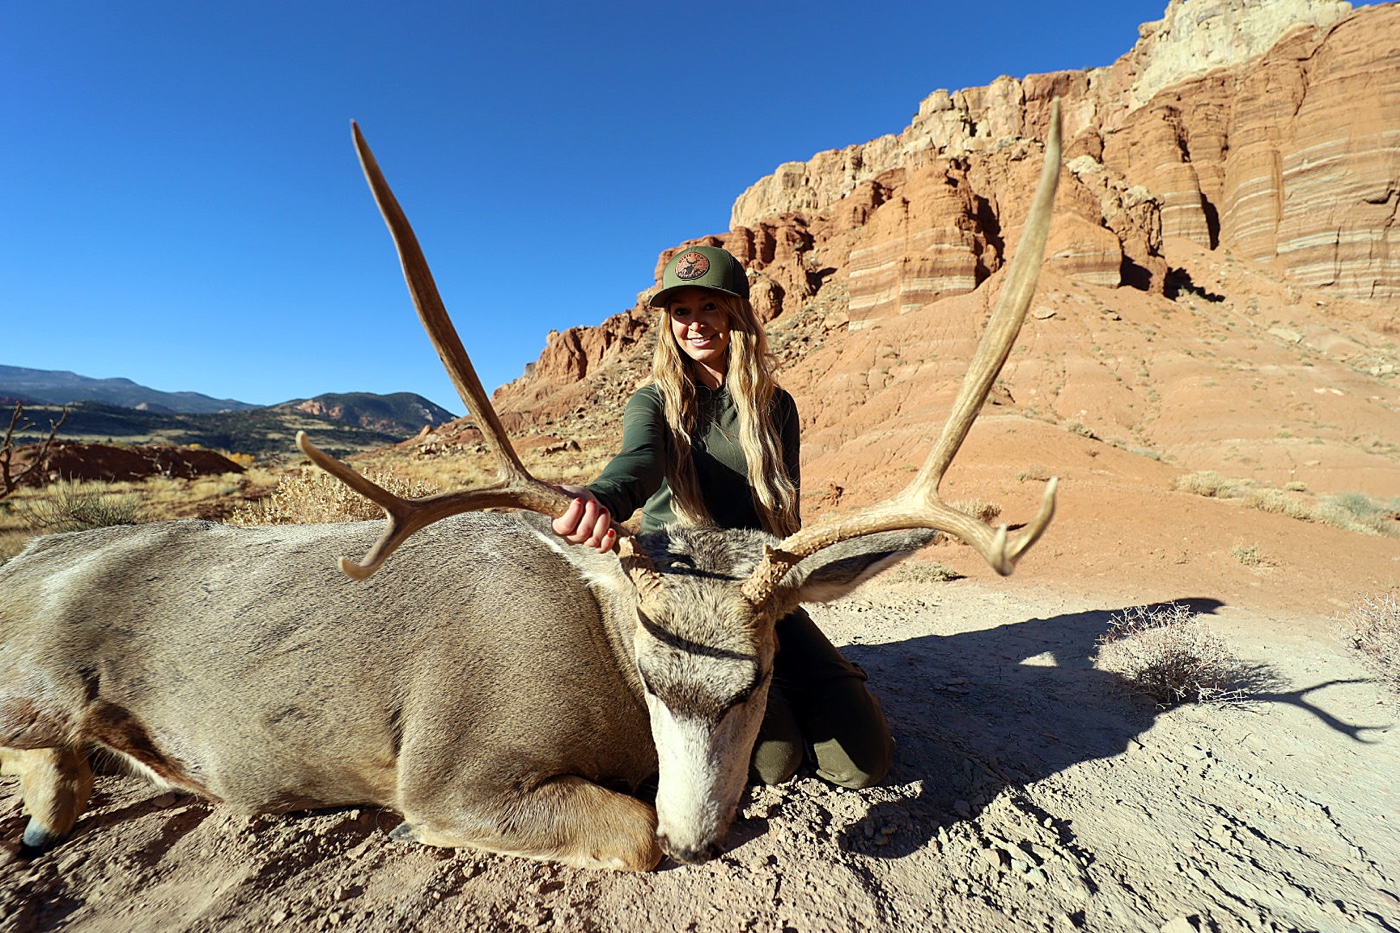 In this photo, the author is photographed kneeling next to the large mature buck mule deer she hunted with a Springfield Armory bolt action rifle chambered for the 6.5 PRC cartridge. She shows us how to hunt mule deer in this article.